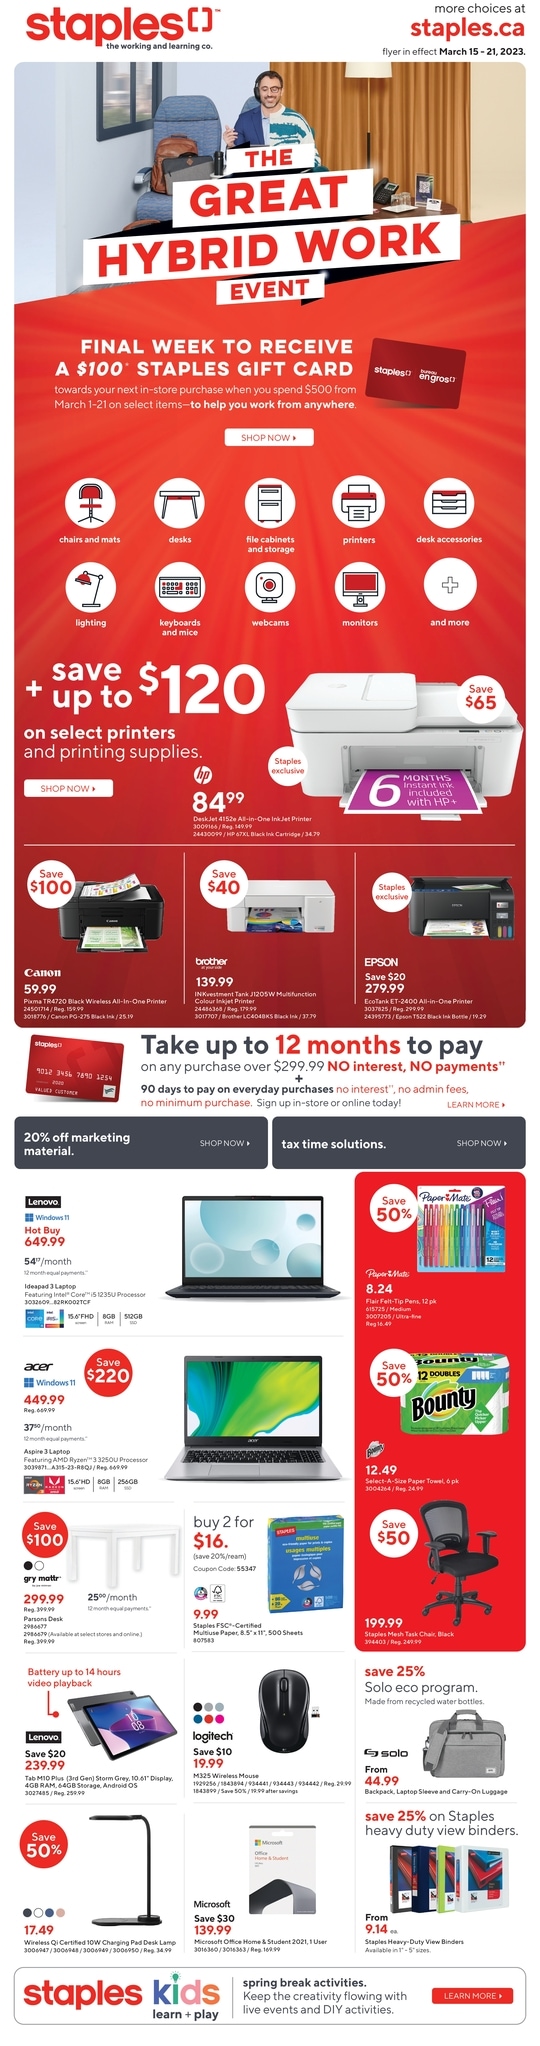 Staples - Weekly Flyer Specials - Page 1